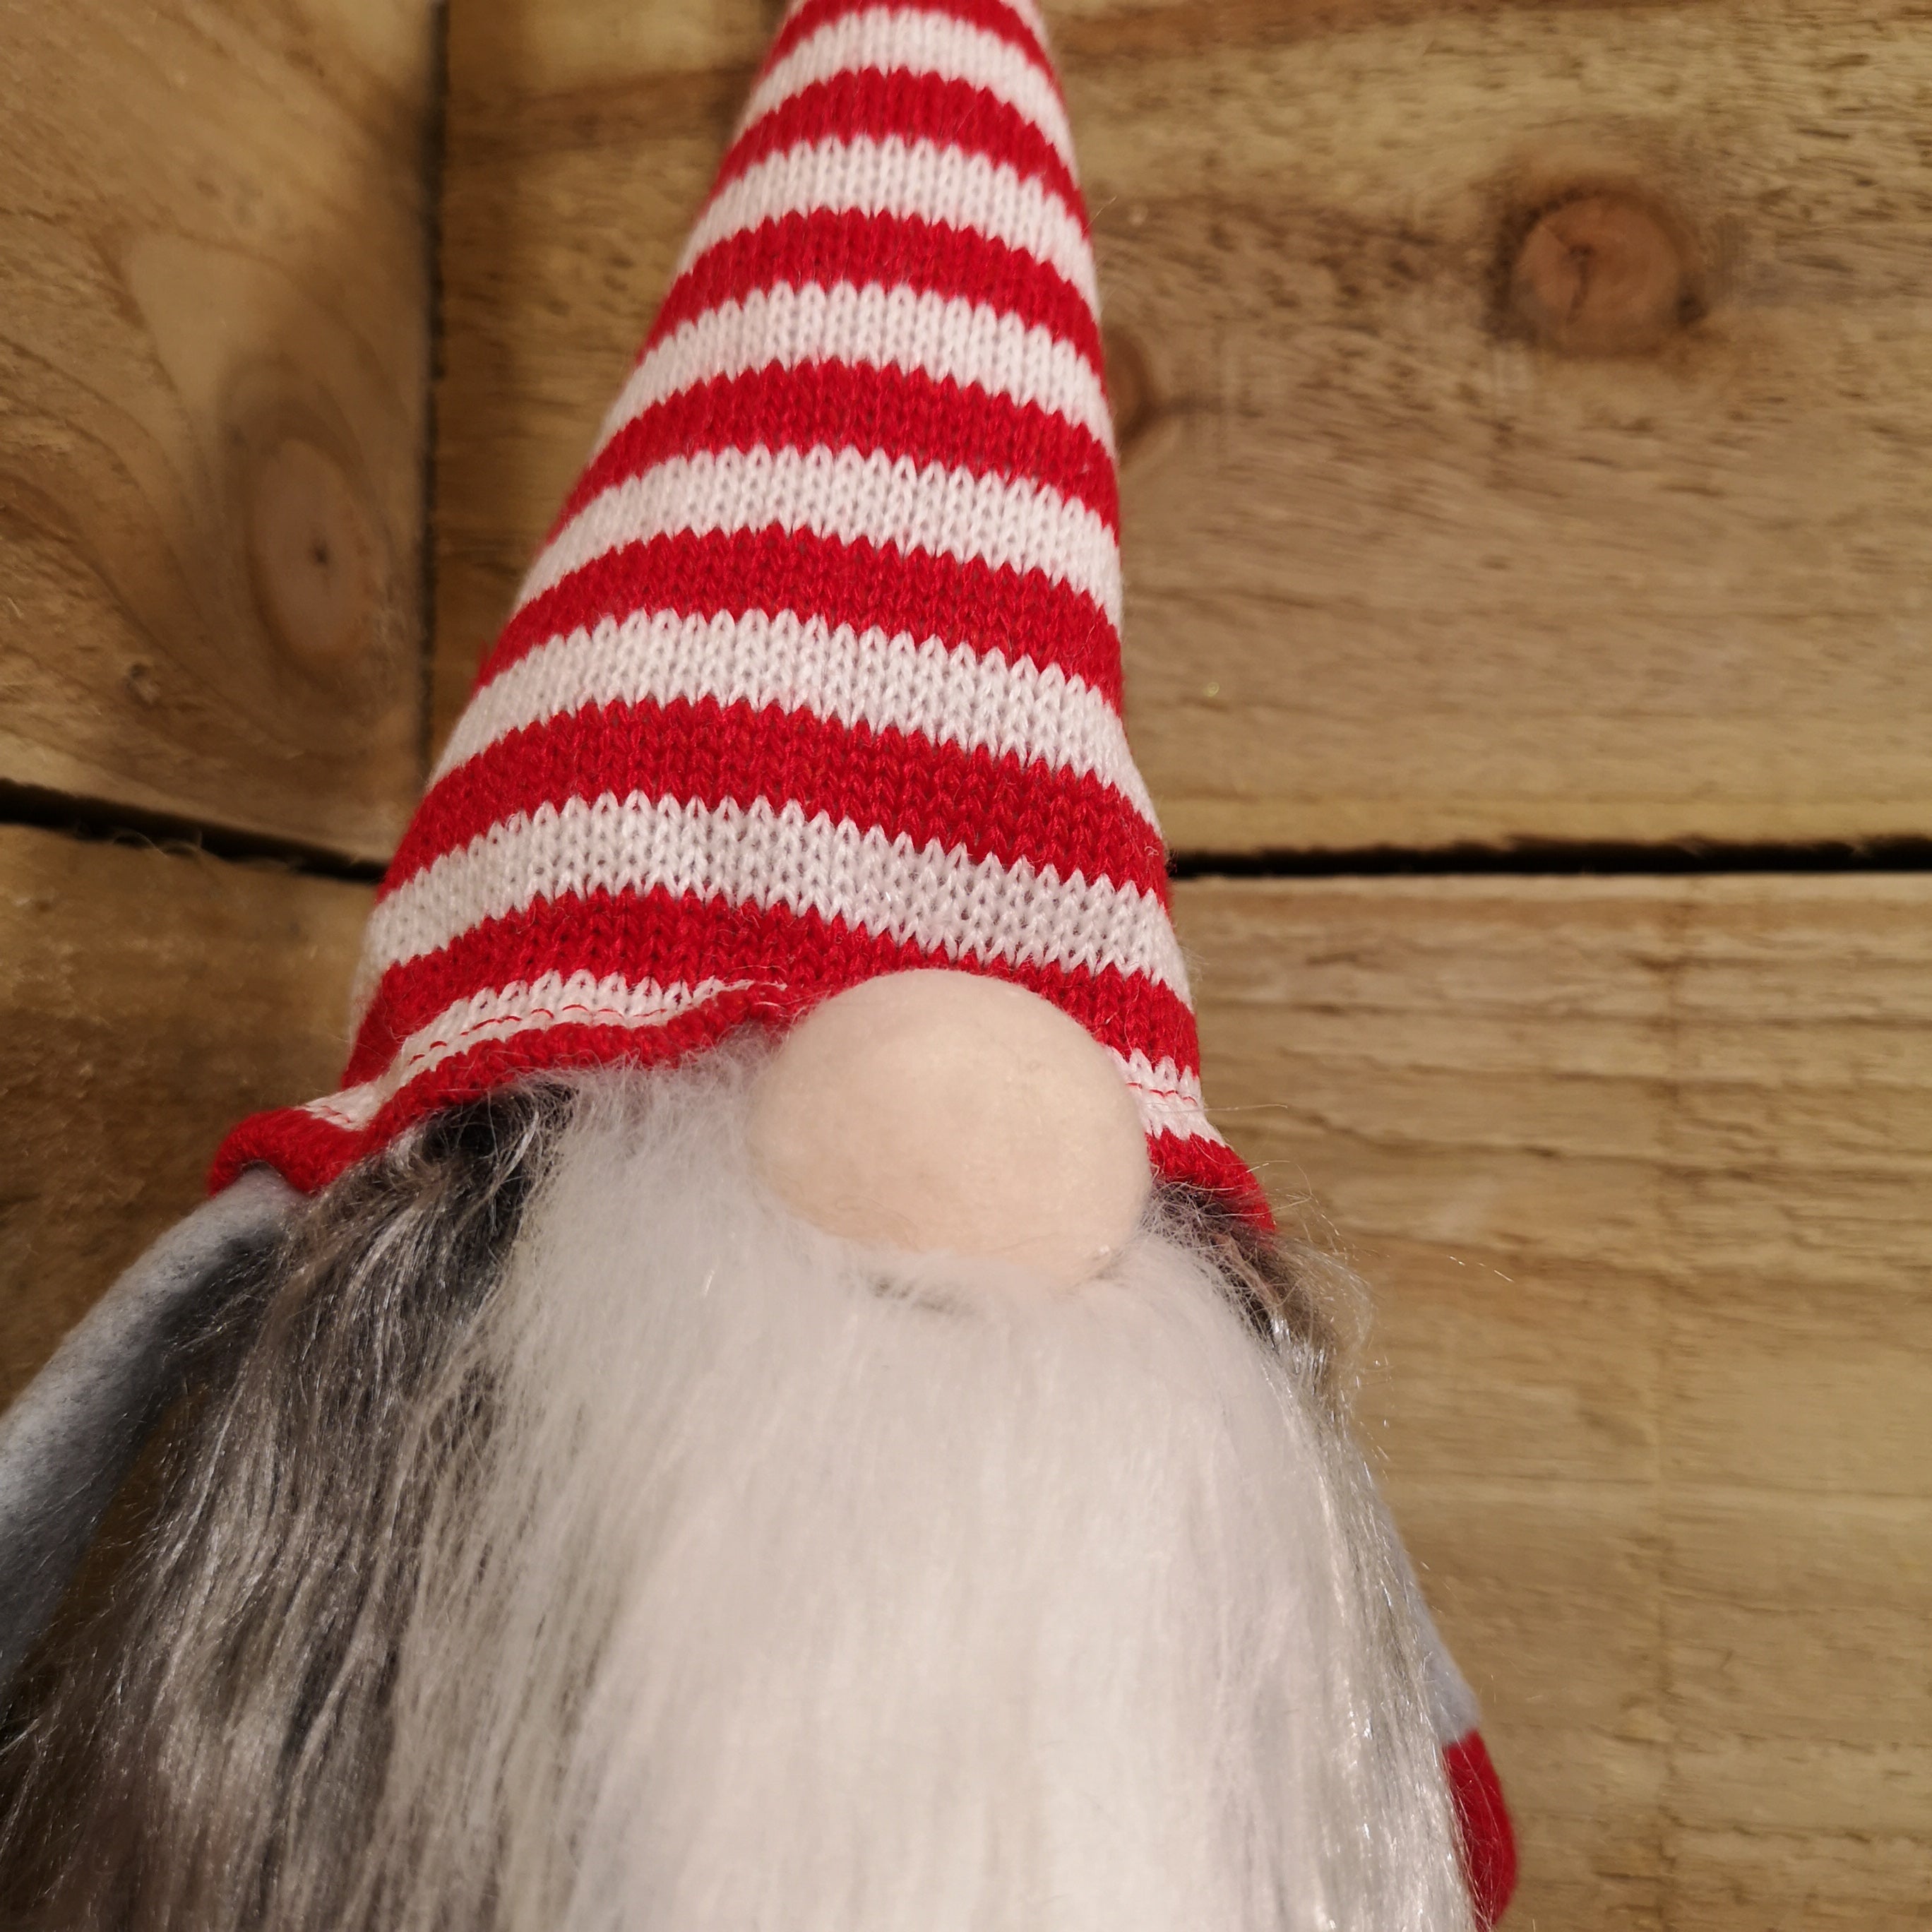 54cm Festive Christmas Haired Gonk with Dangly Legs in Striped Hat